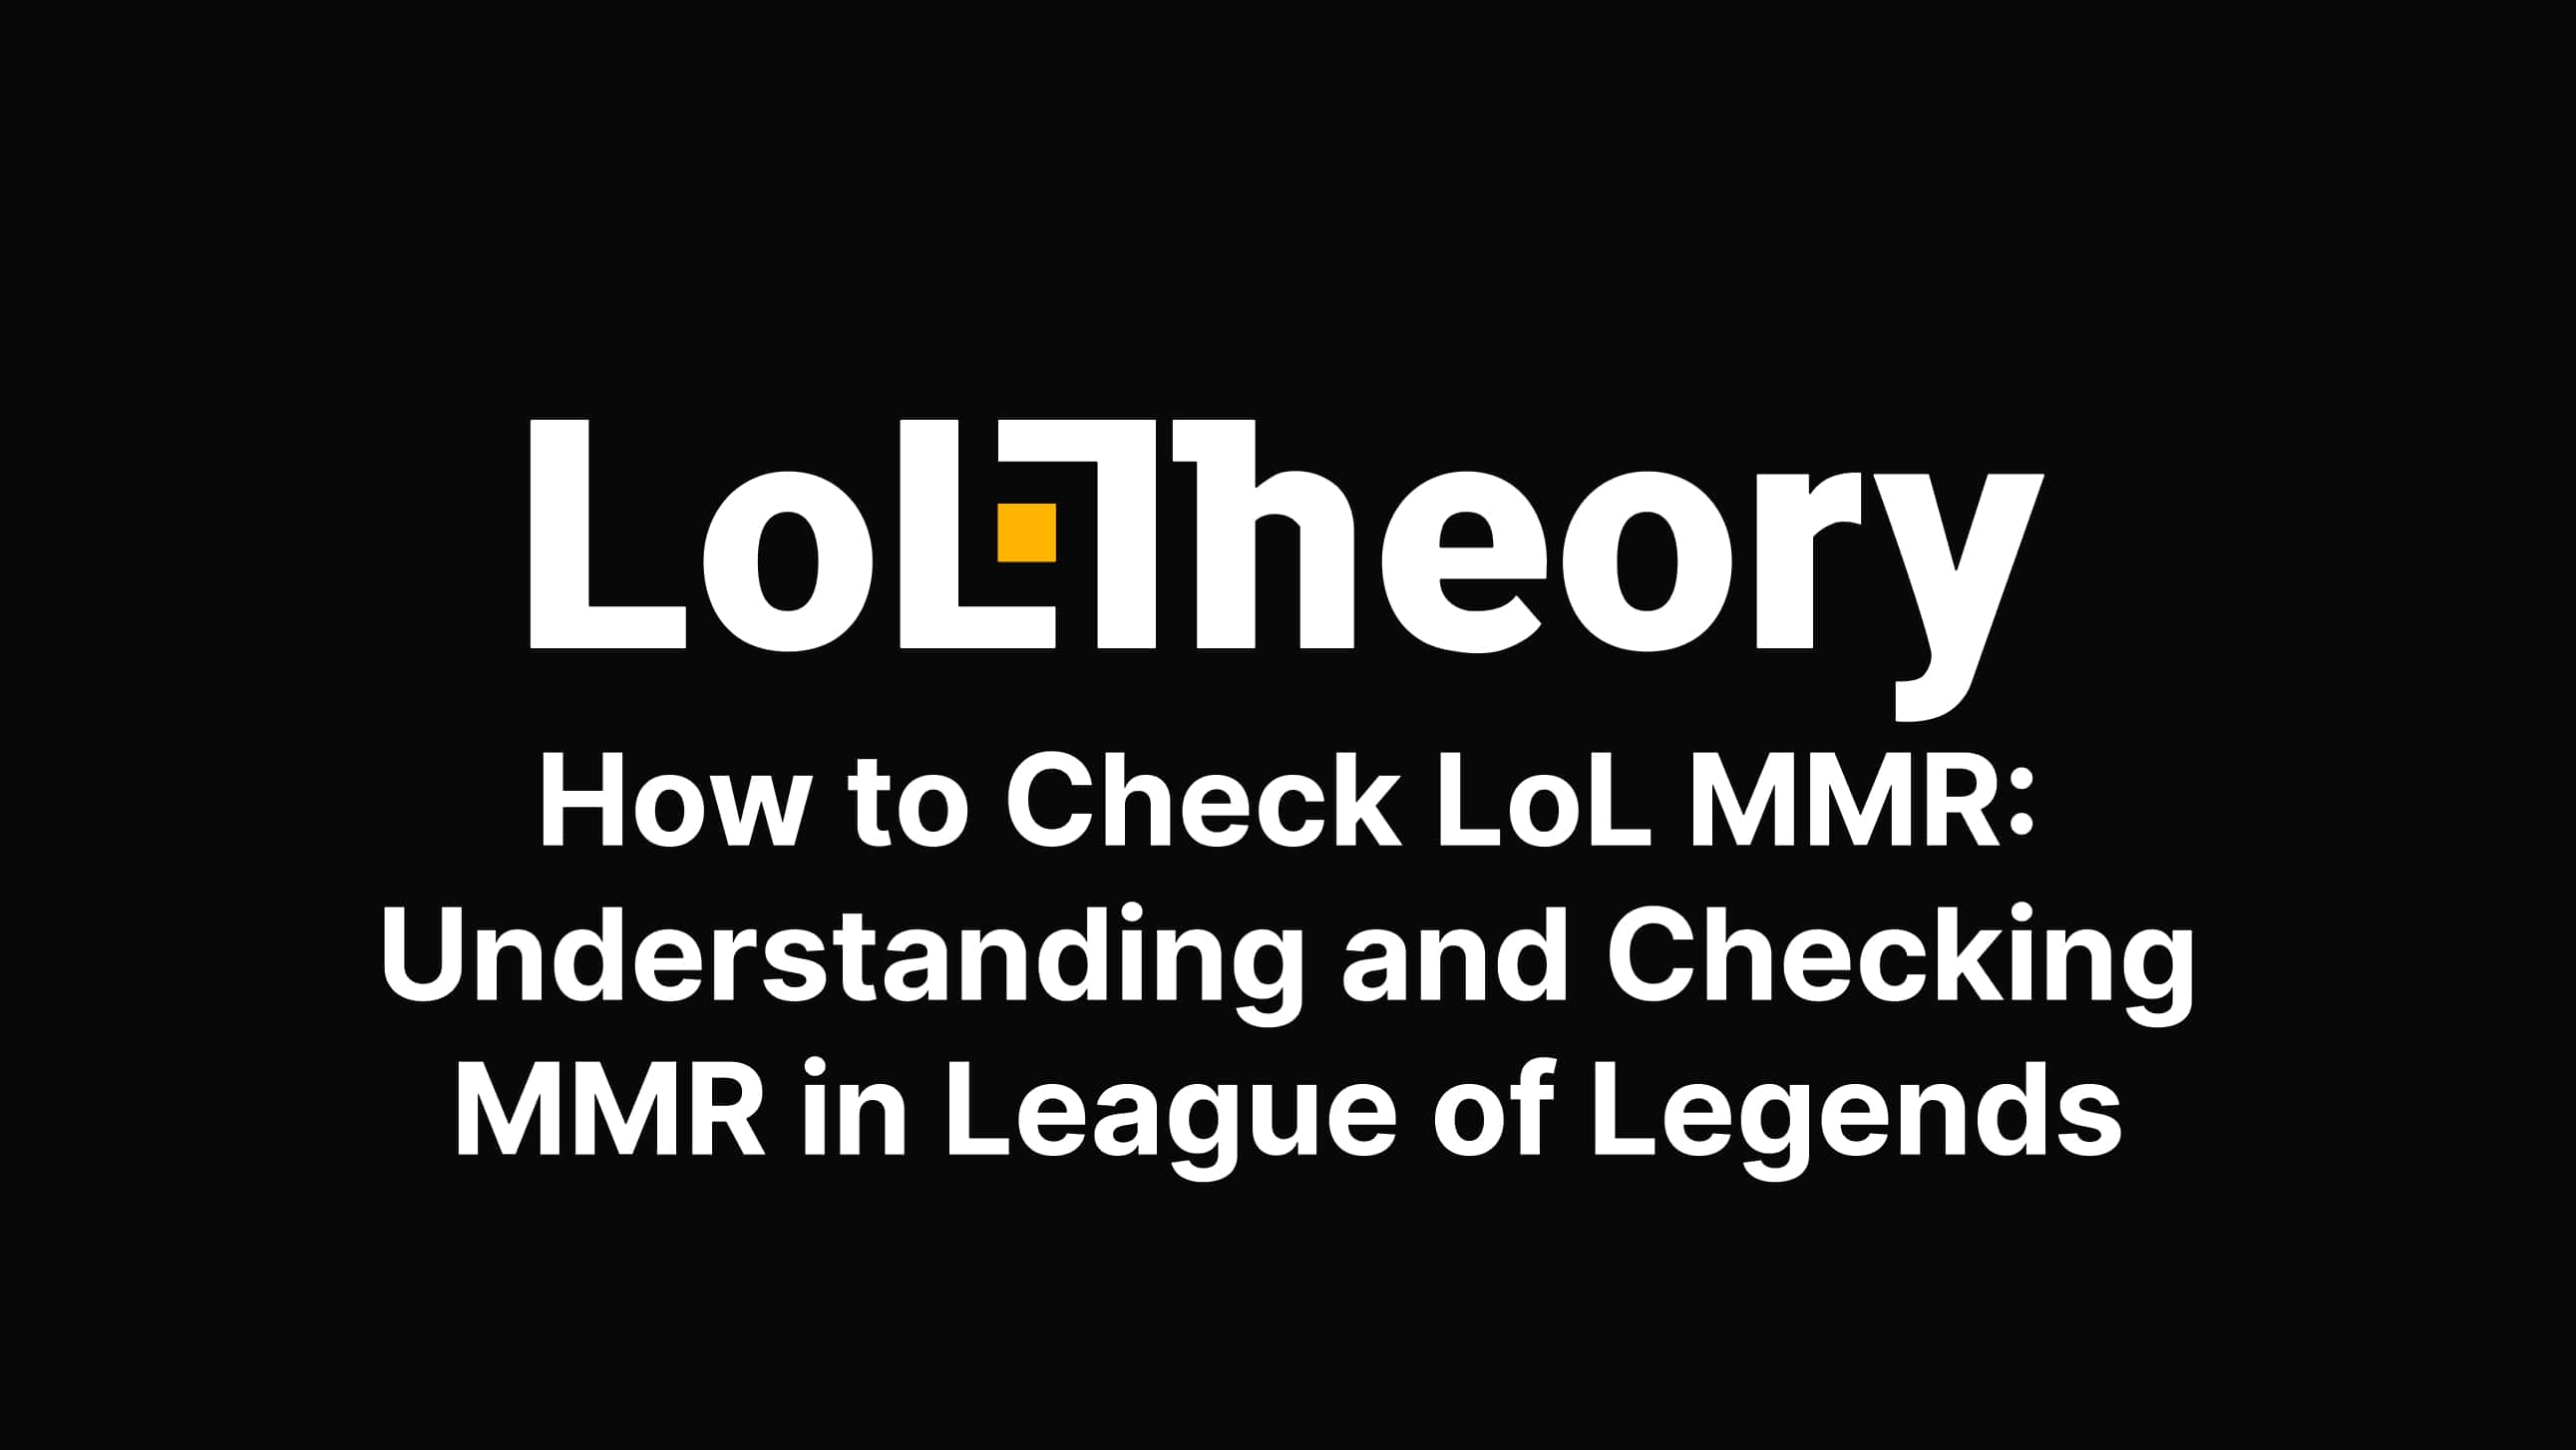 Derecho es suficiente Consulado How to Check LoL MMR: Understanding and Checking MMR in League of Legends -  loltheory.gg